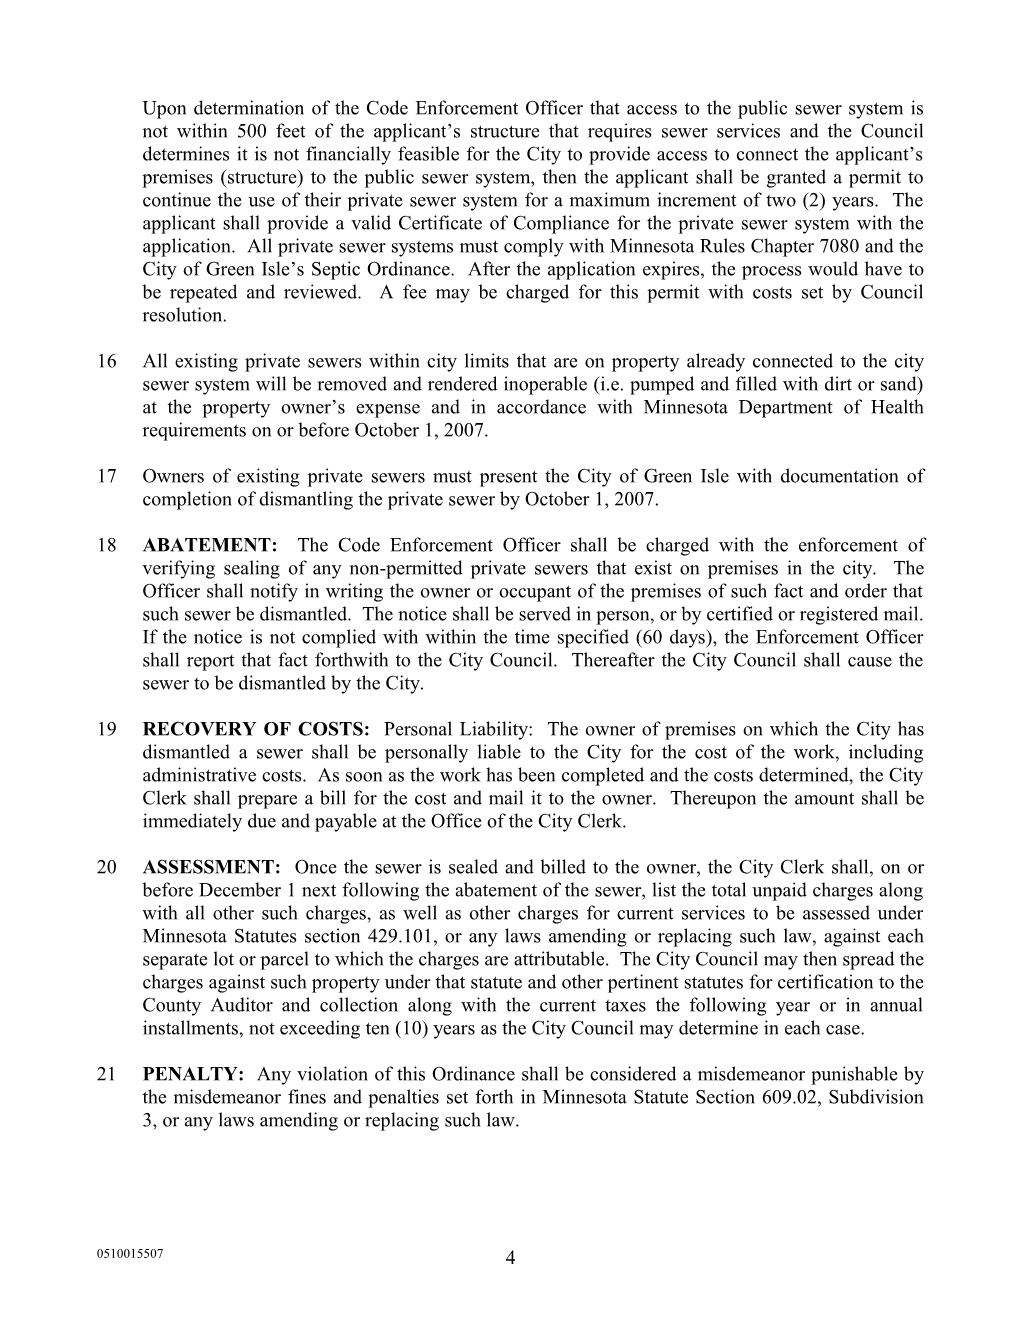 An Ordinance Regulating the Use of Private Water and Sewer Systems Within the City Of